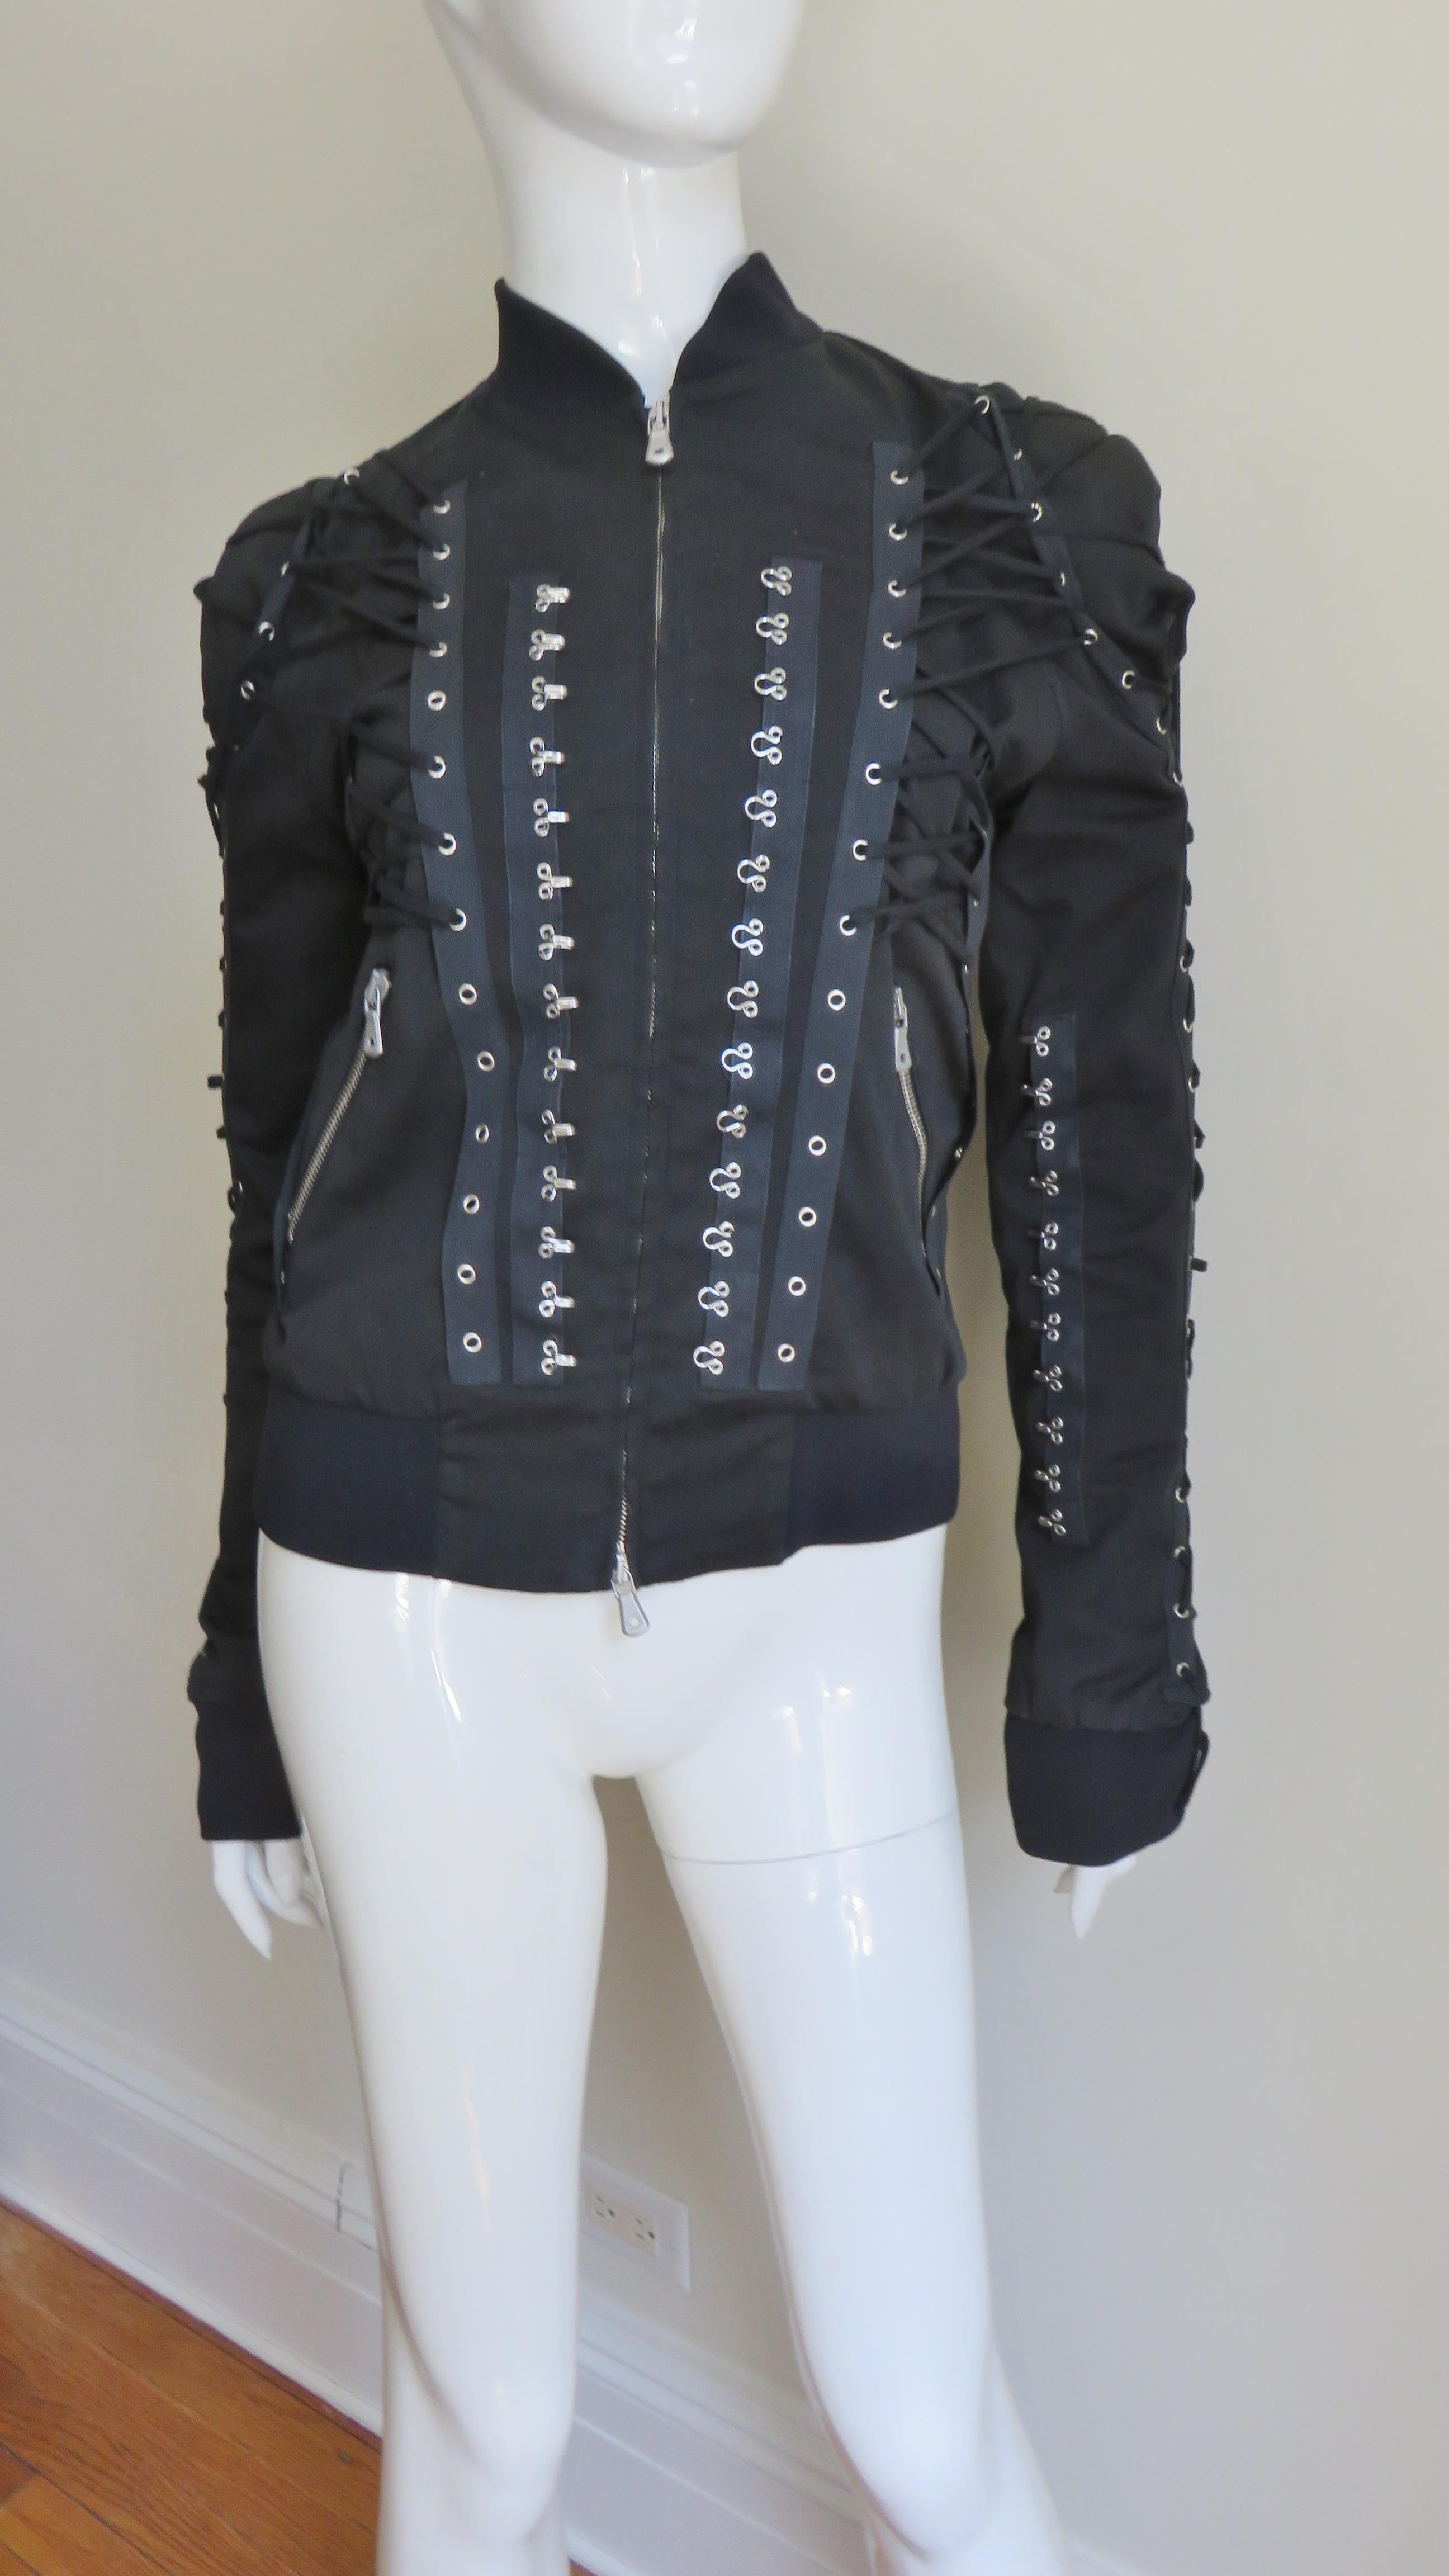 An incredible black cotton with a bit of stretch jacket from Dolce & Gabbana.  It has a silver front zipper with Dolce & Gabbana pulls and also on the angled front pockets.  It is stunning with it's amazing array of vertical functional lacing- along